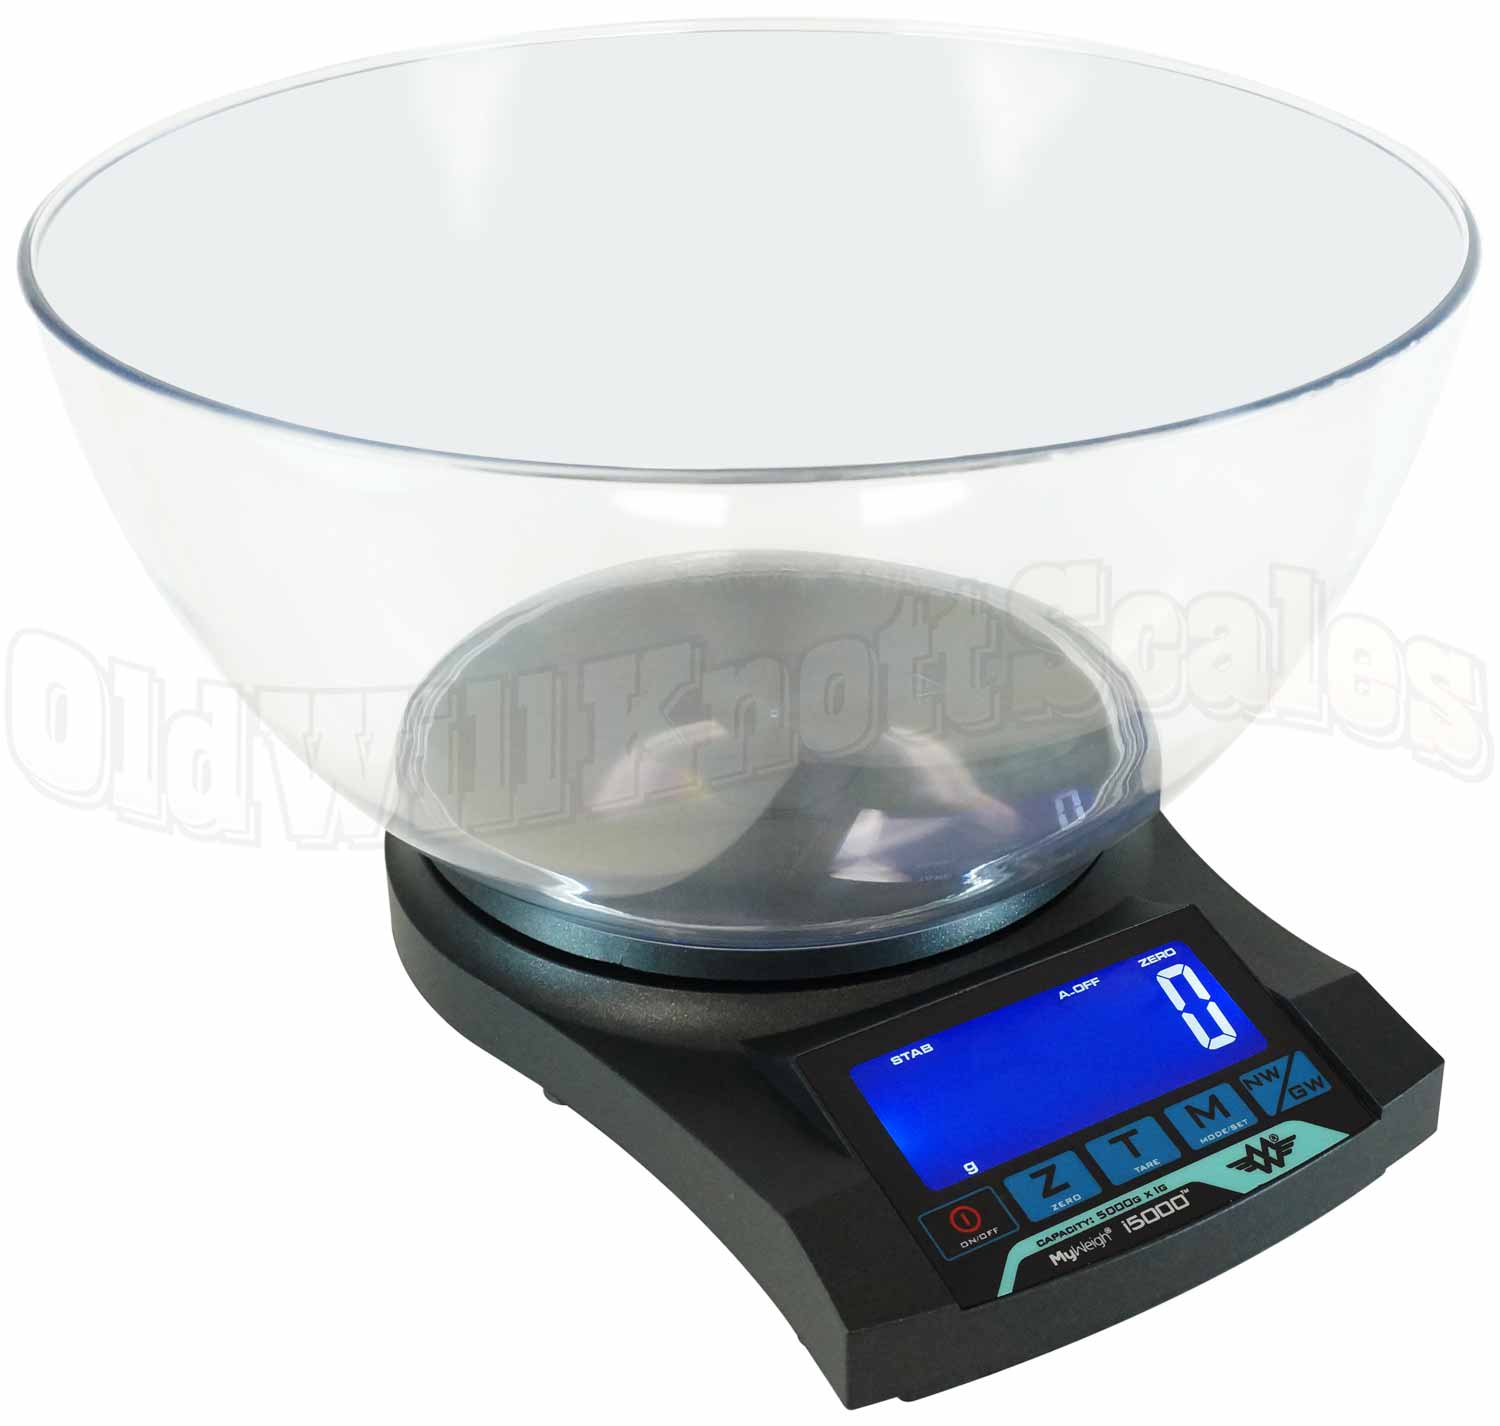 For Baking, This Digital Scale Stands Above The Rest